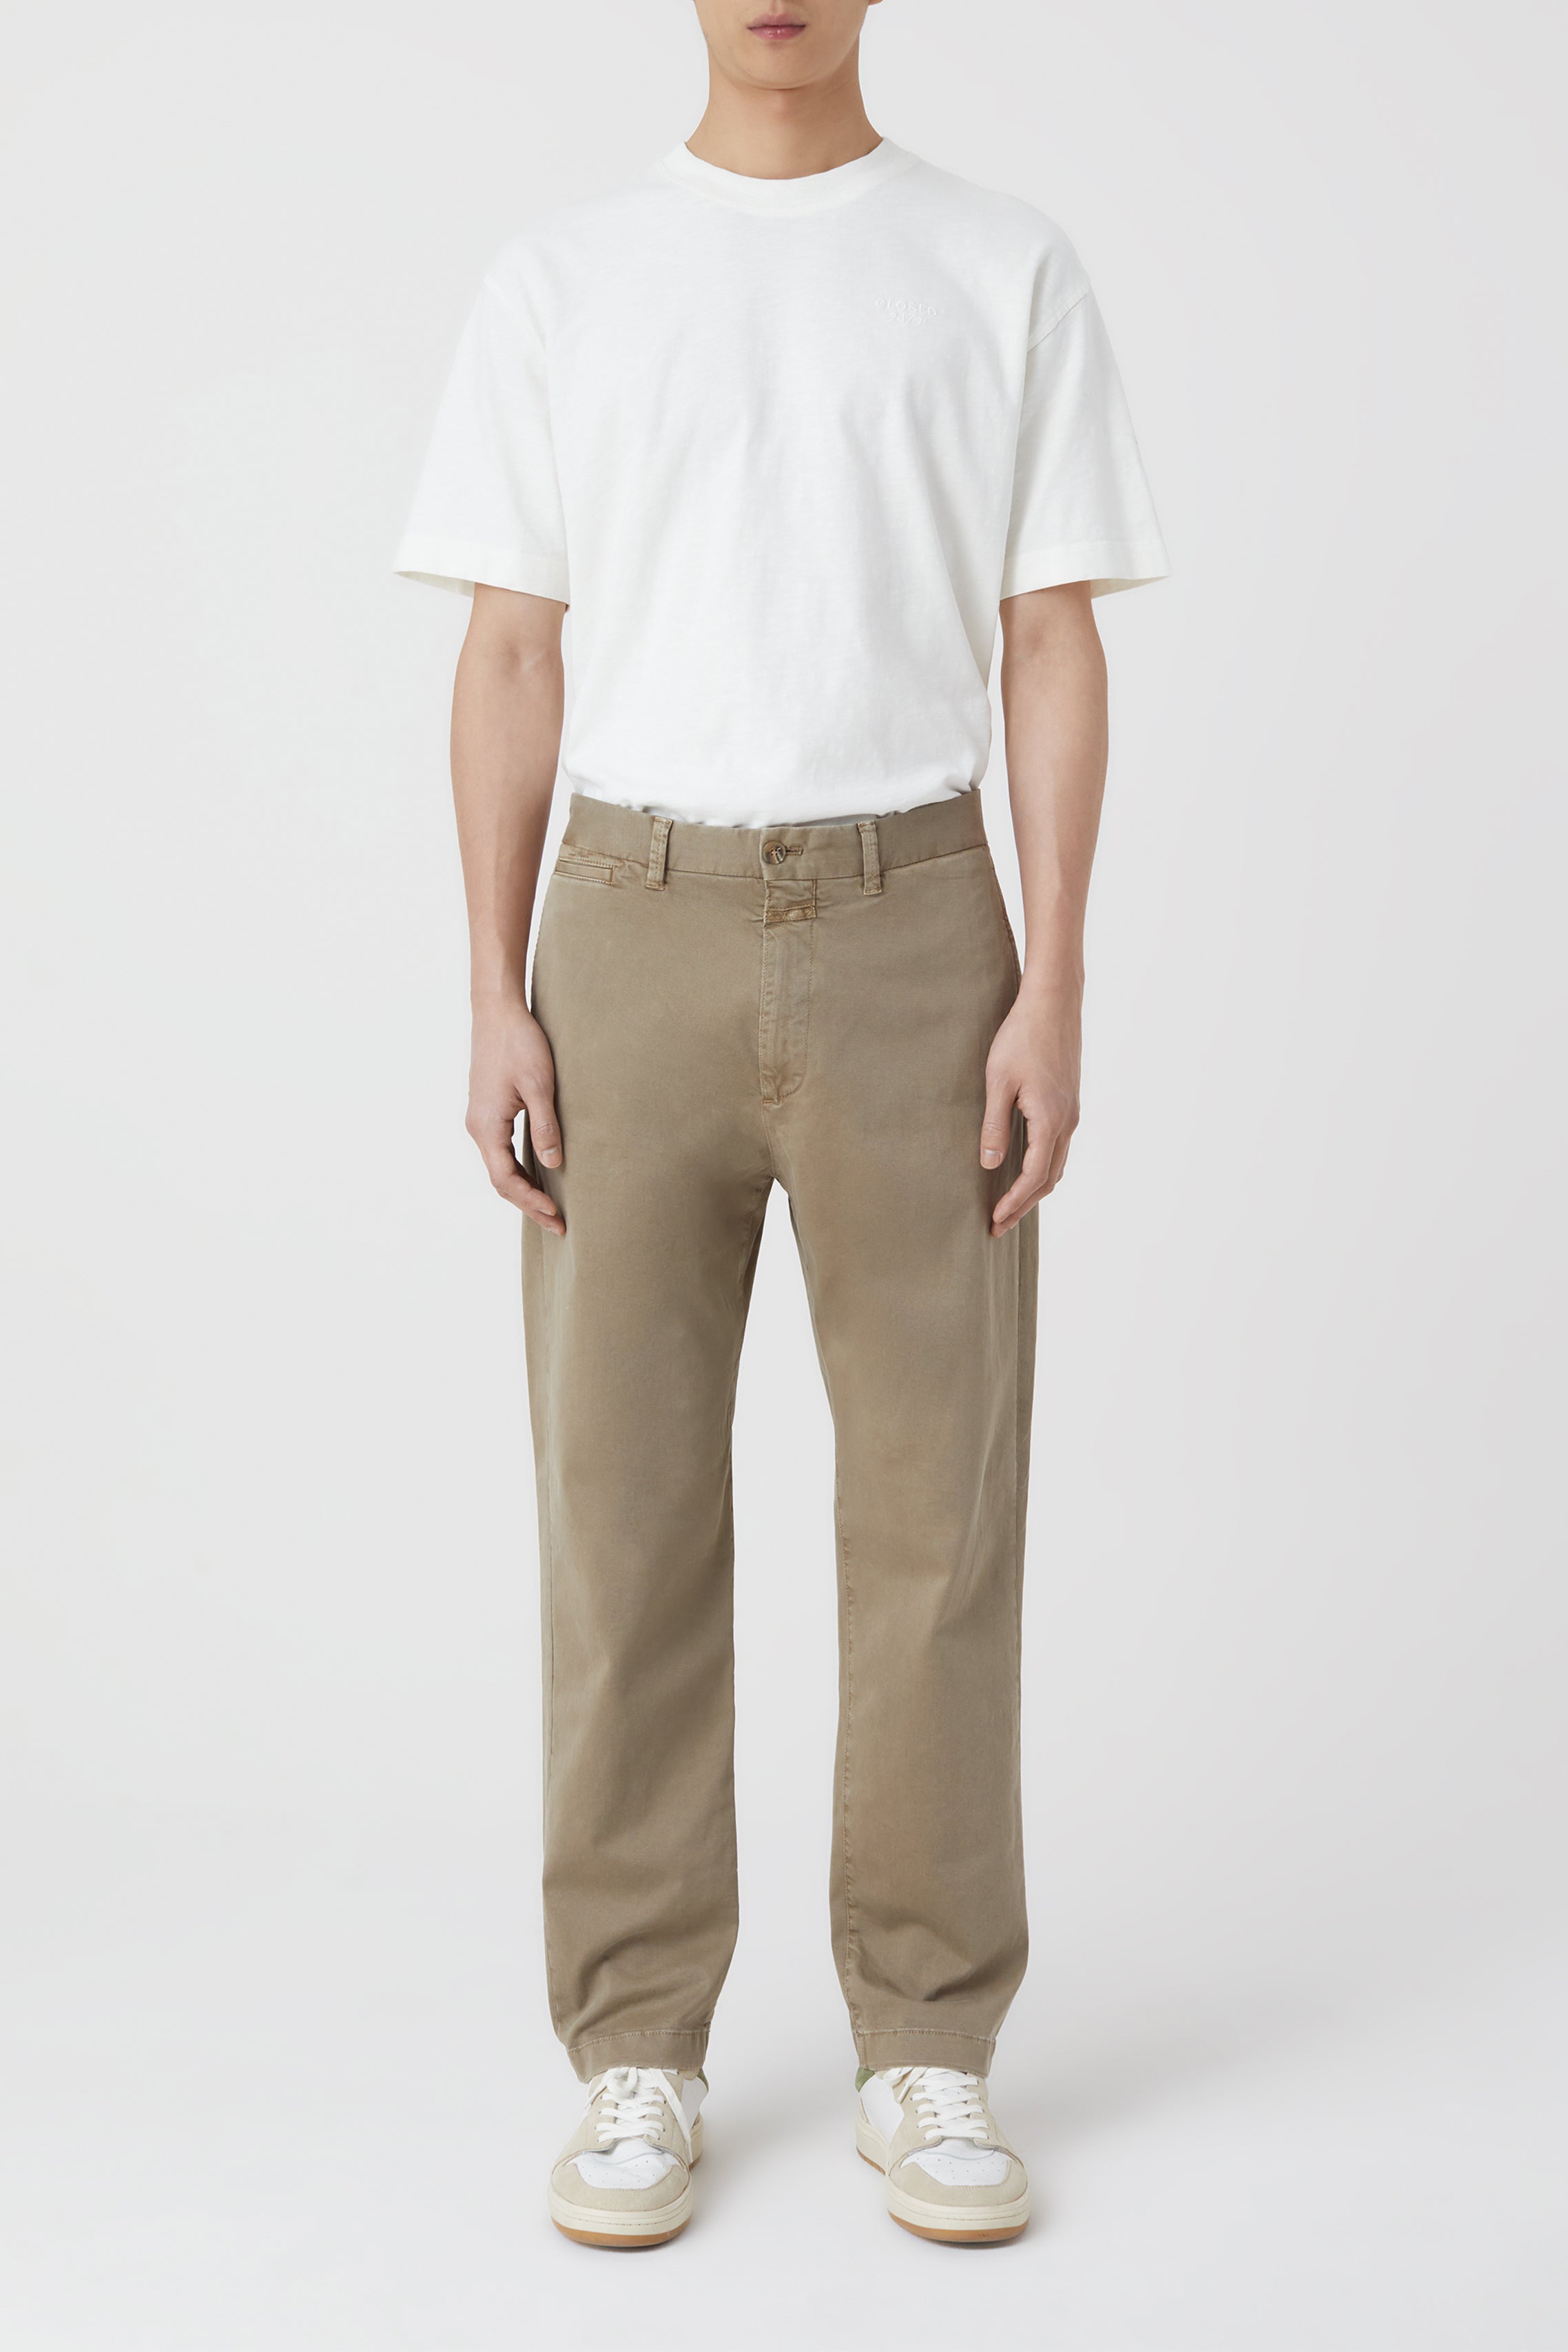 CLOSED-OUTLET-SALE-STYLE-NAME-TACOMA-TAPERED-PANTS-Hosen-ARCHIVE-COLLECTION_861f6e0e-e97d-4ed3-aae7-97a154f64626.jpg